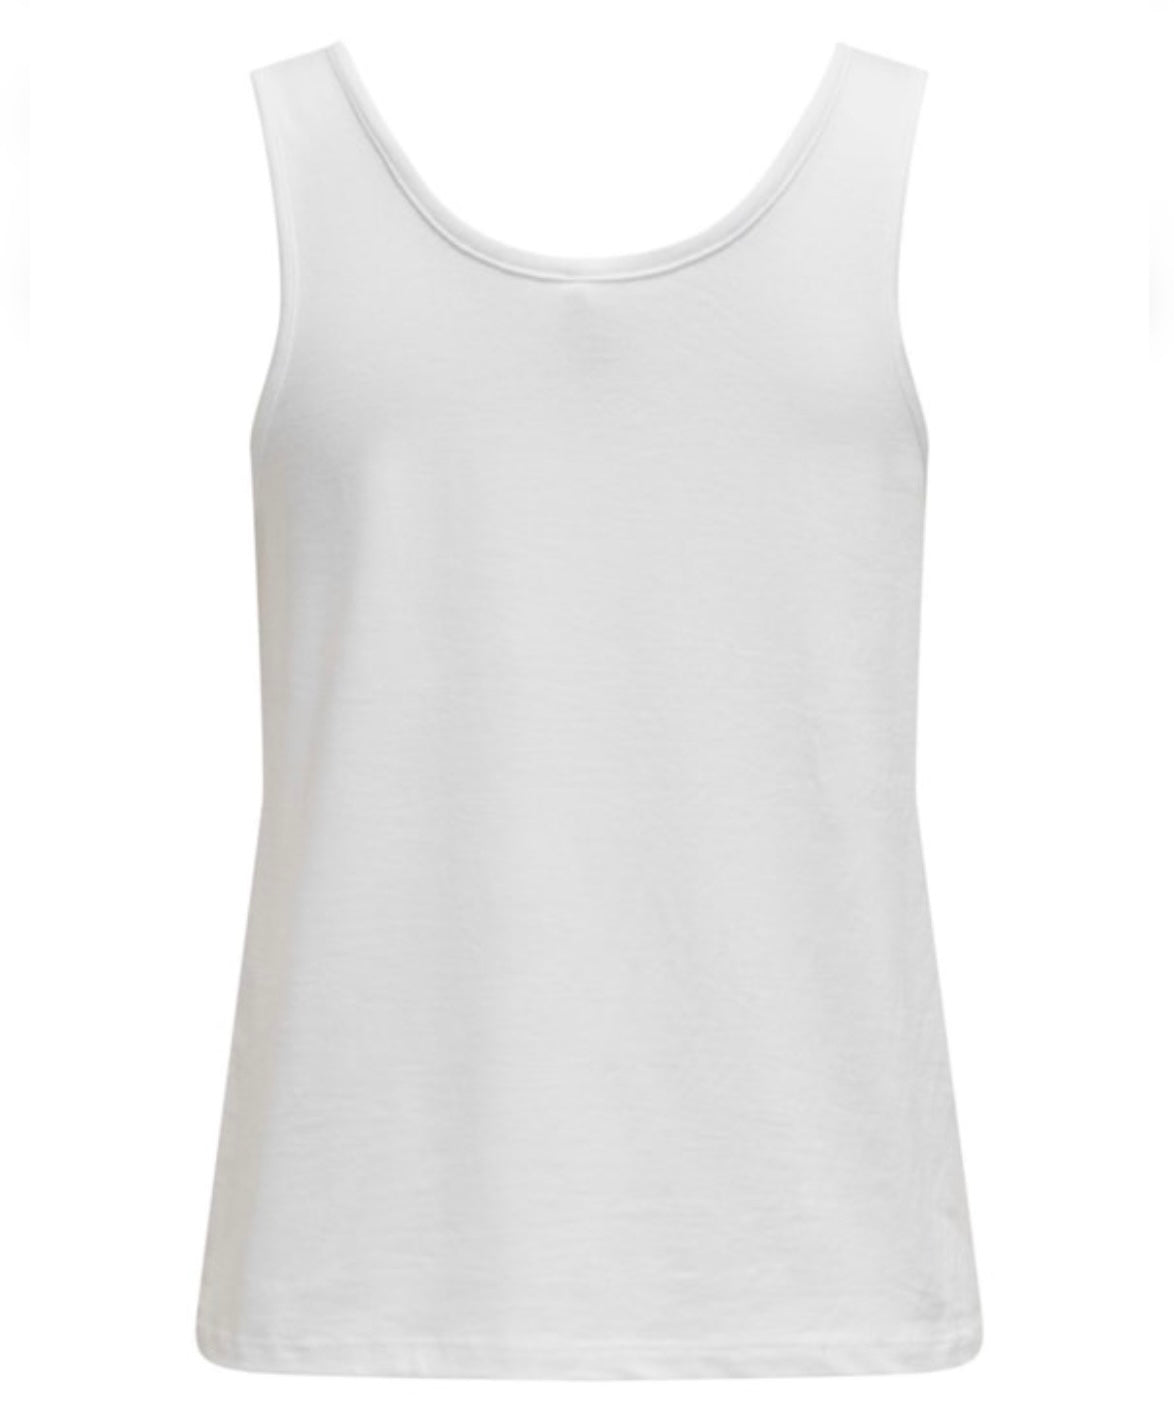 ONLY - MOSTER S/L TANK TOP - WHITE